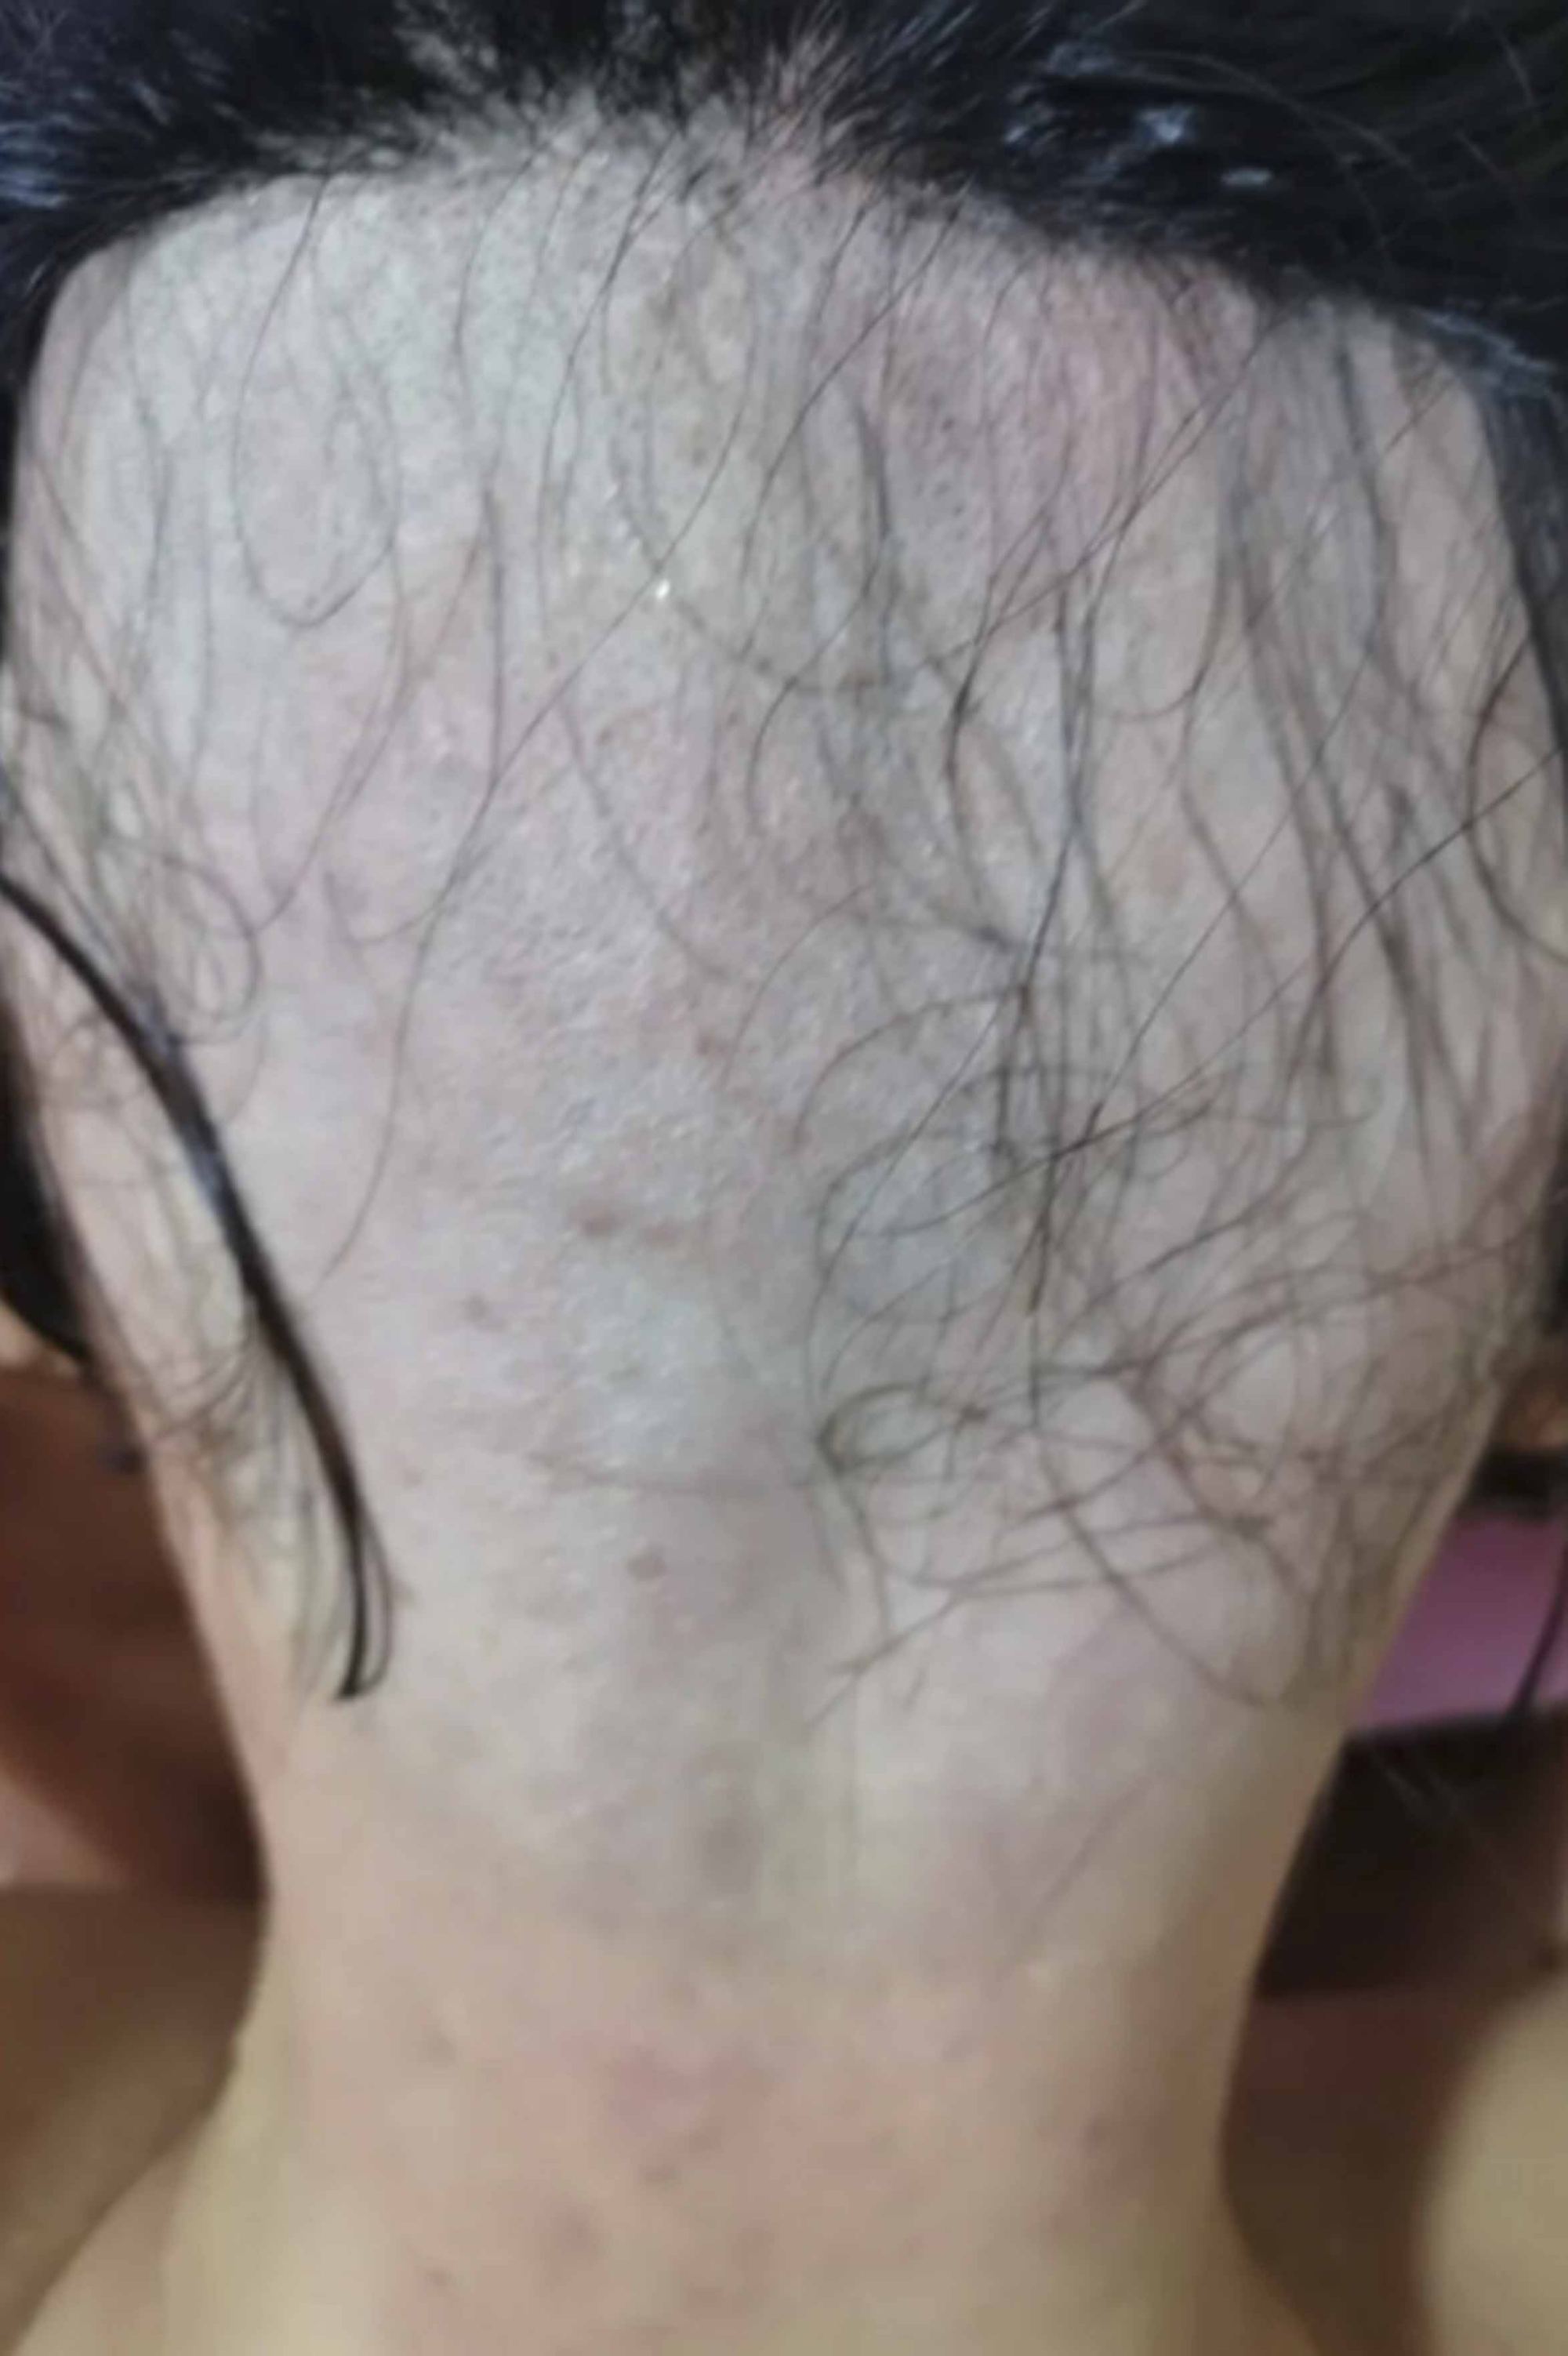 I went for a haircut and was filmed for sleazy fetish website Chinese police probe womans head-shaving ordeal South China Morning Post